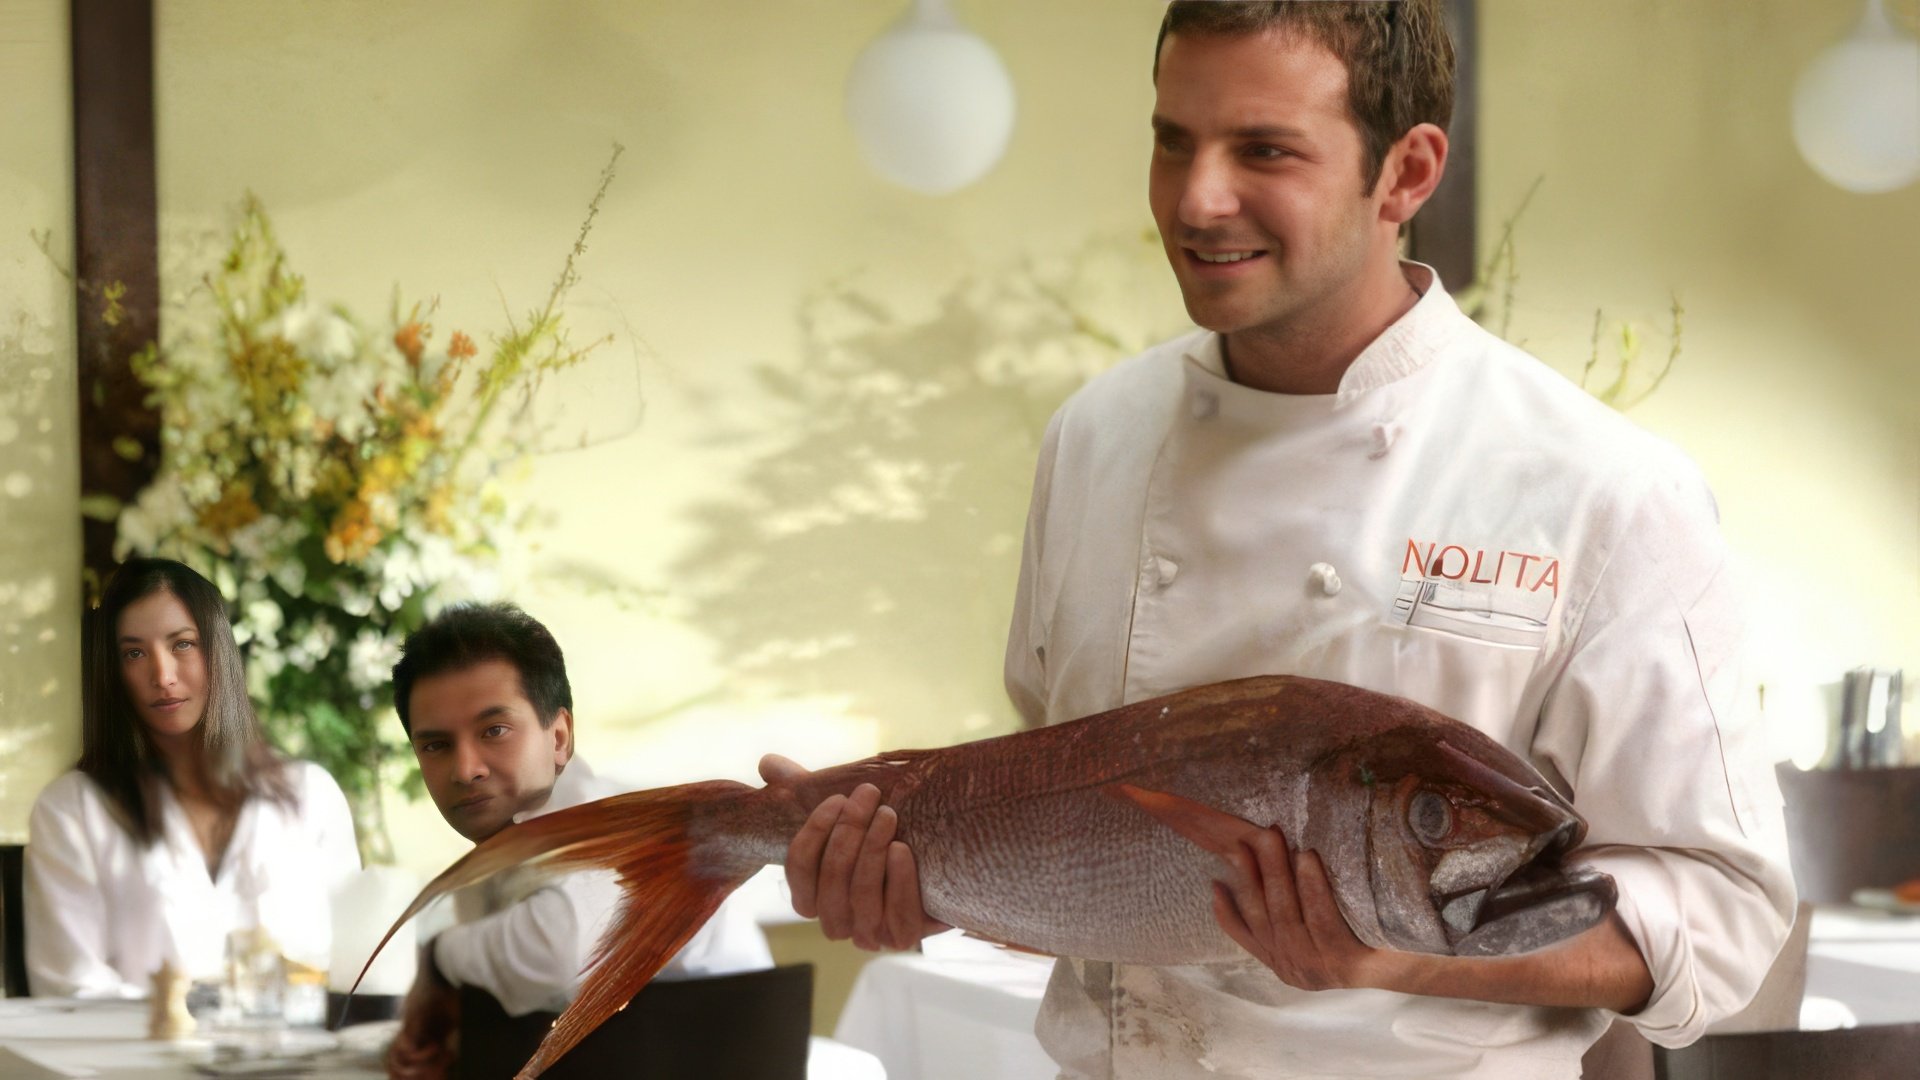 In 2005, Bradley Cooper became «a chef» of the restaurant